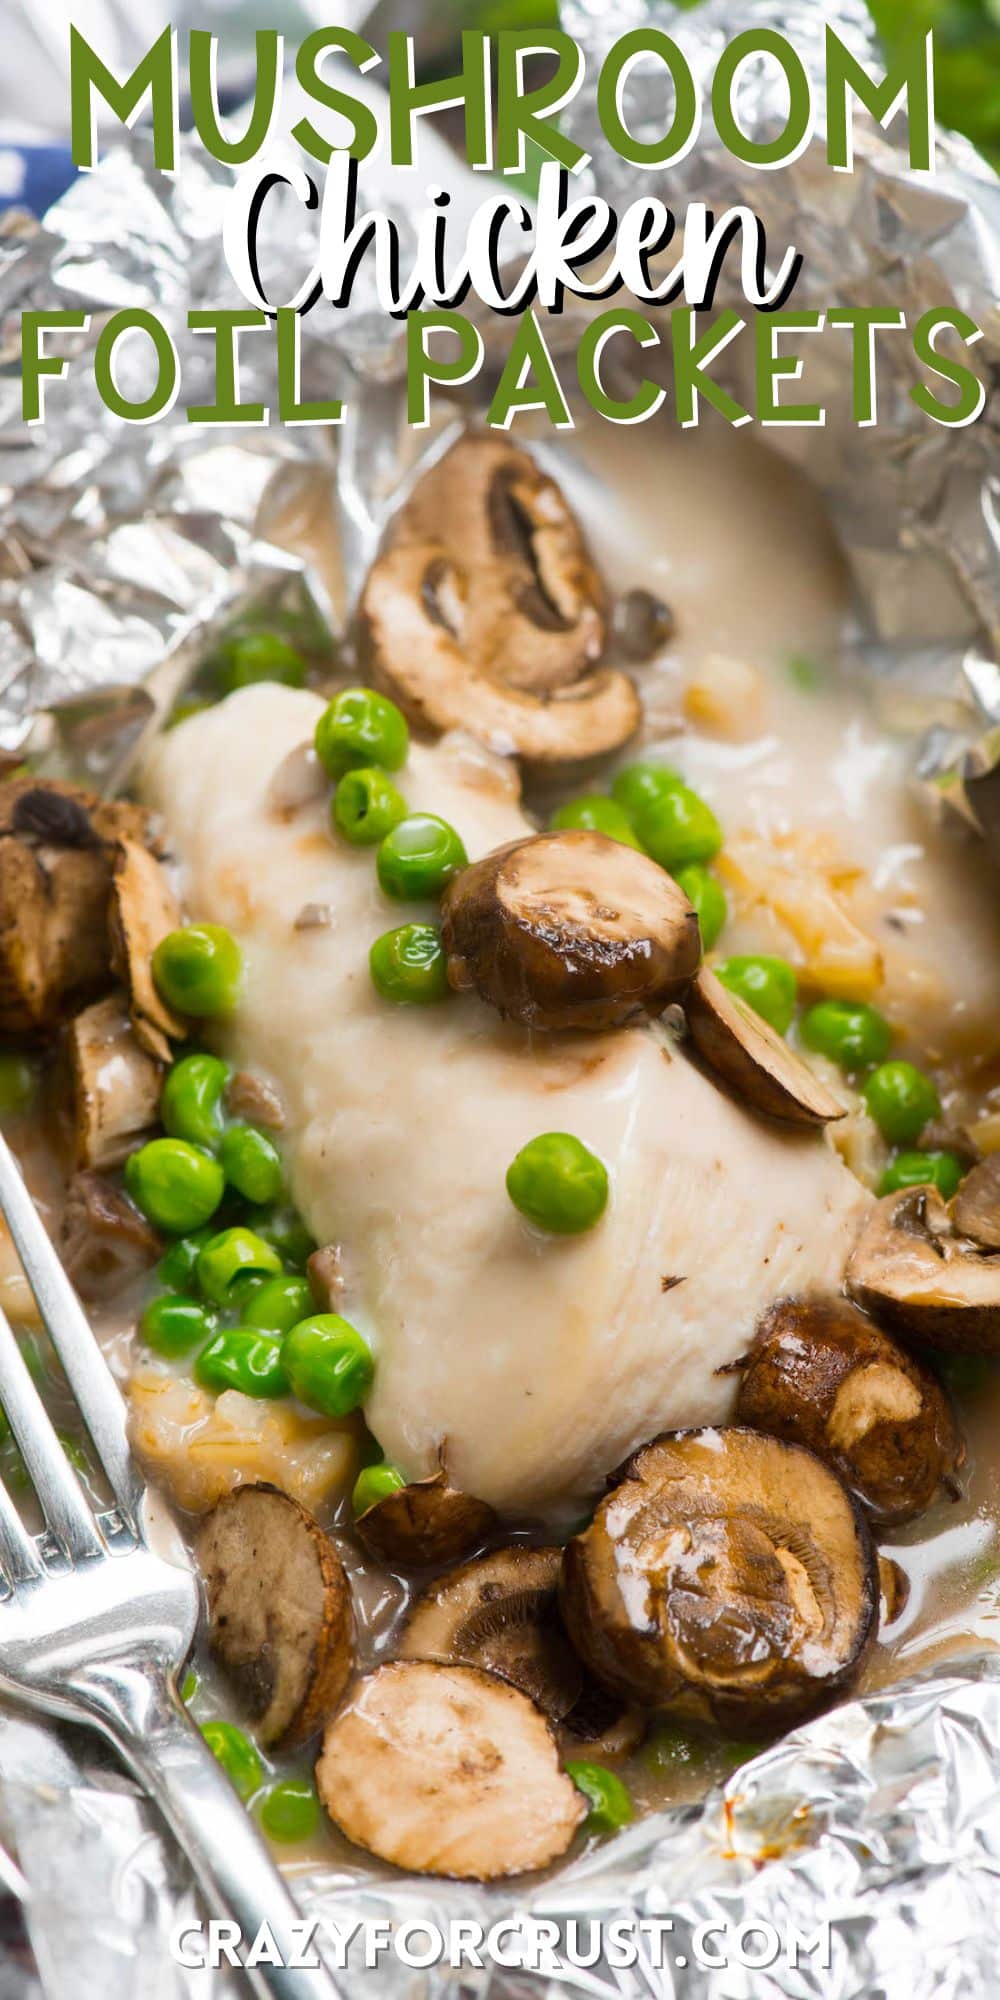 chicken and mushrooms and peas in tinfoil with words on the image.